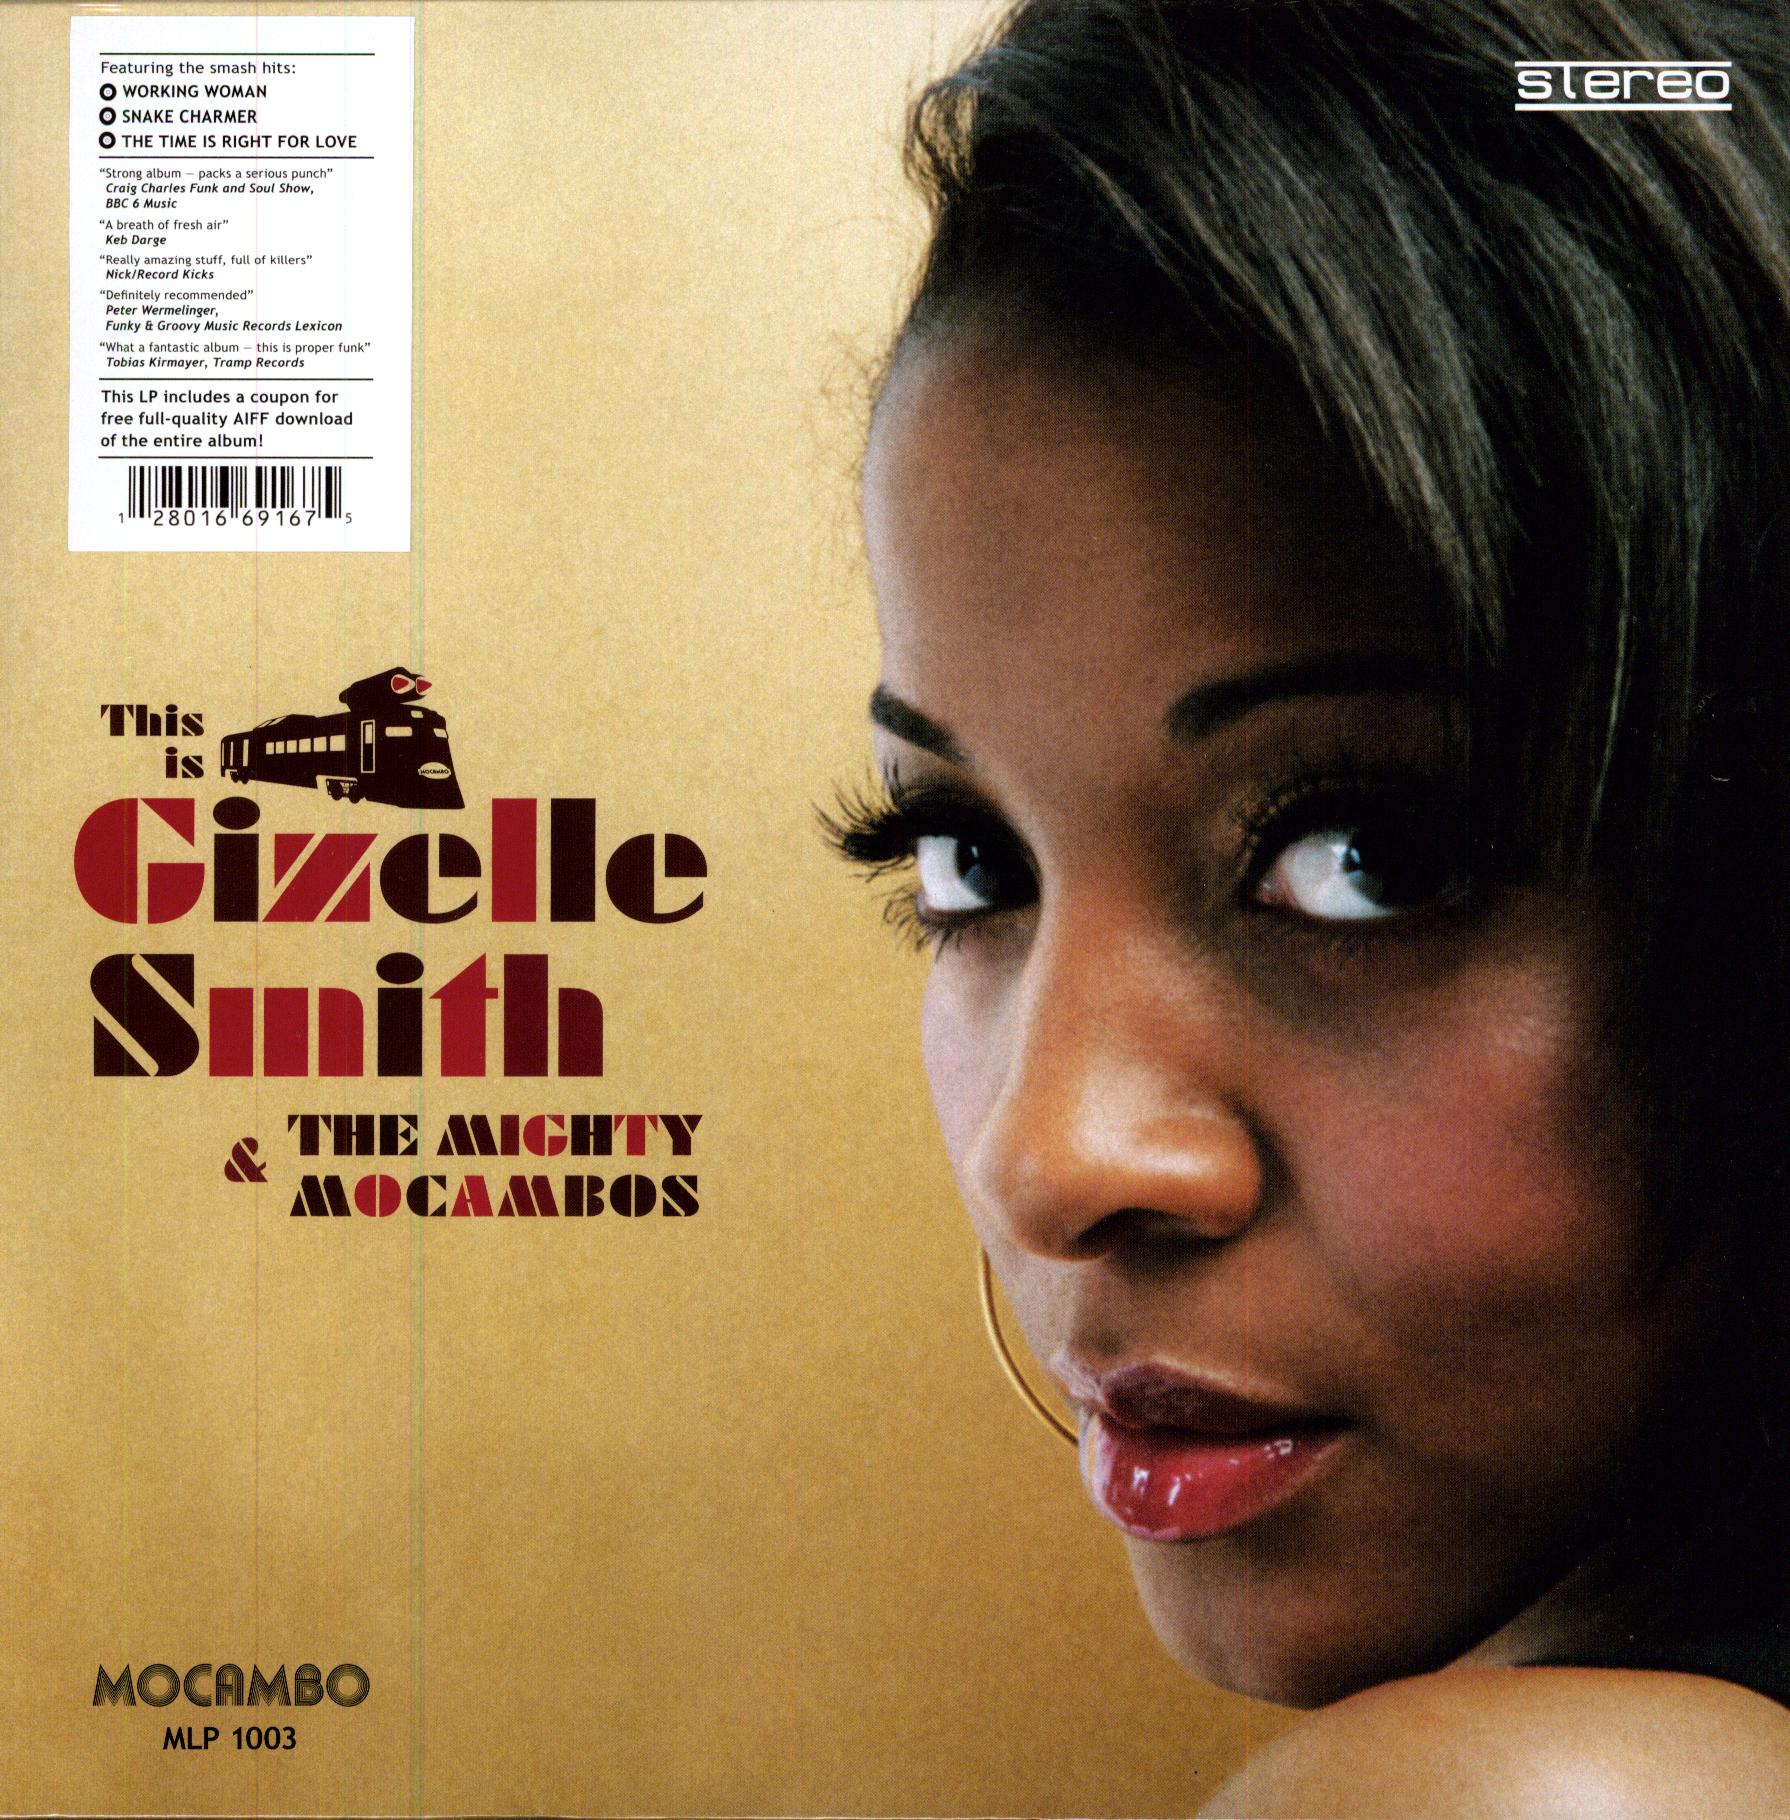 THIS IS GIZELLE SMITH & THE MIGHTY MOCAMBOS (UK)